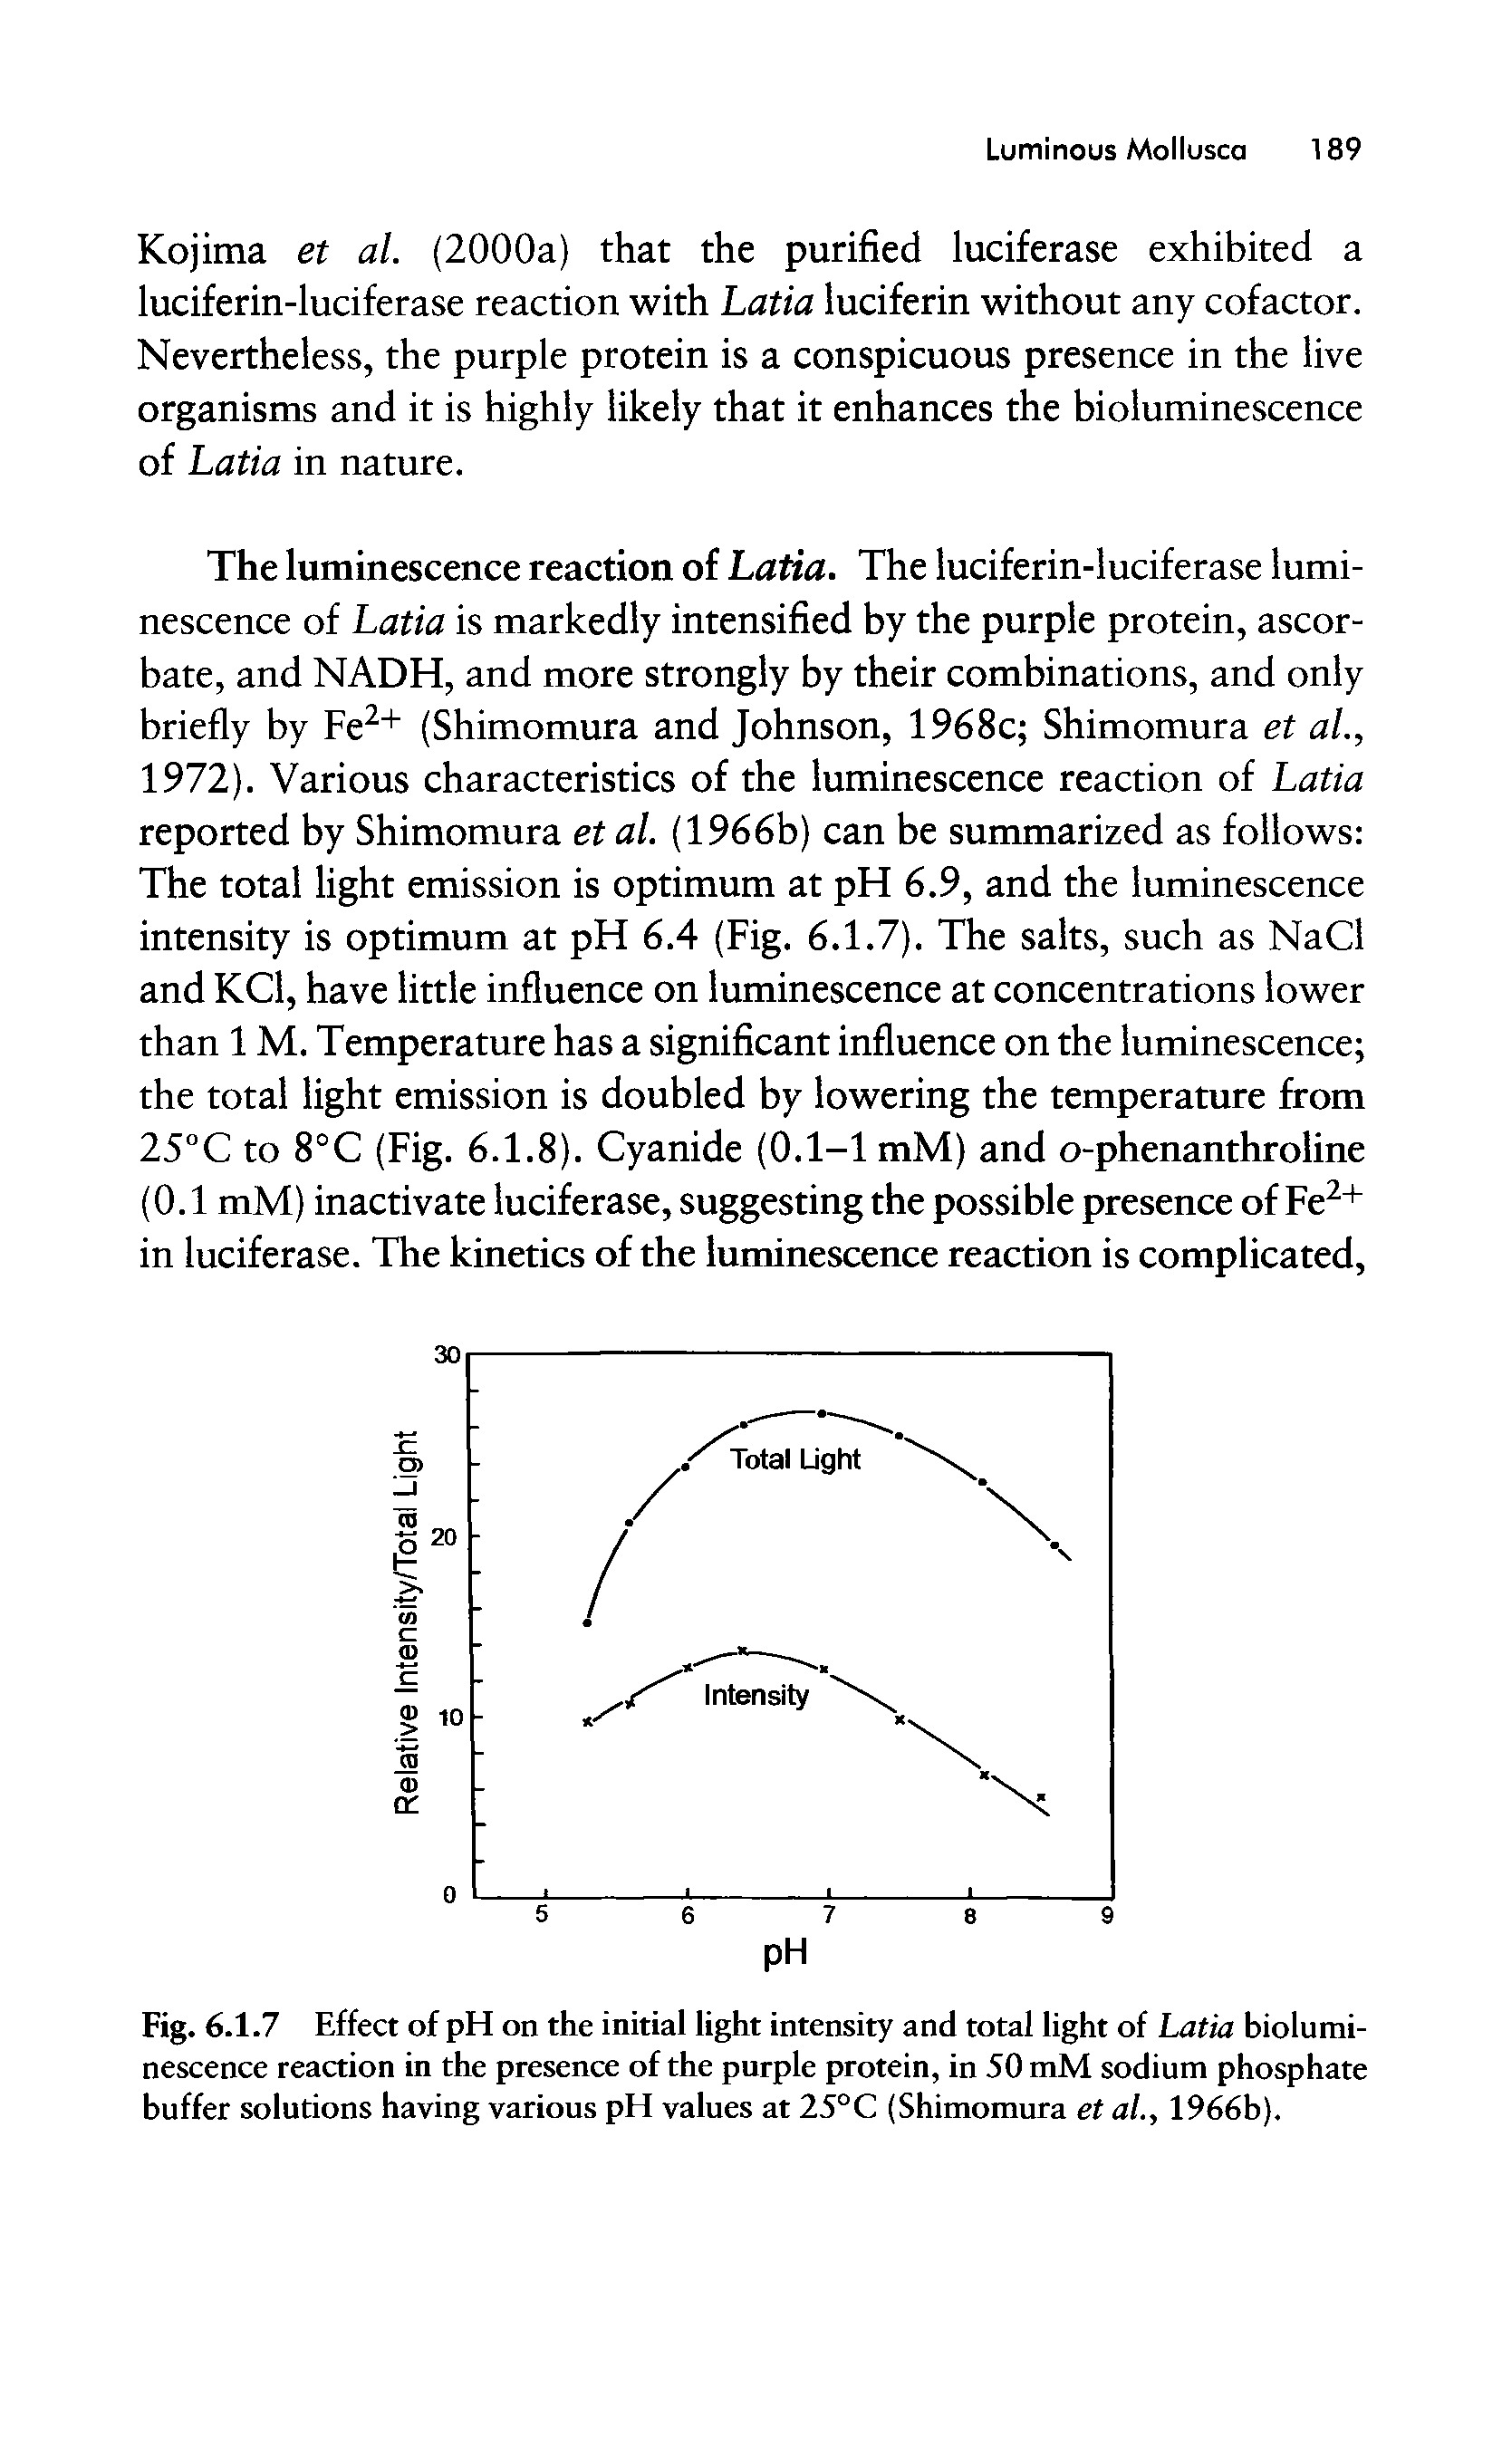 Fig. 6.1.7 Effect of pH on the initial light intensity and total light of Latia bioluminescence reaction in the presence of the purple protein, in 50 mM sodium phosphate buffer solutions having various pH values at 25°C (Shimomura et al., 1966b).